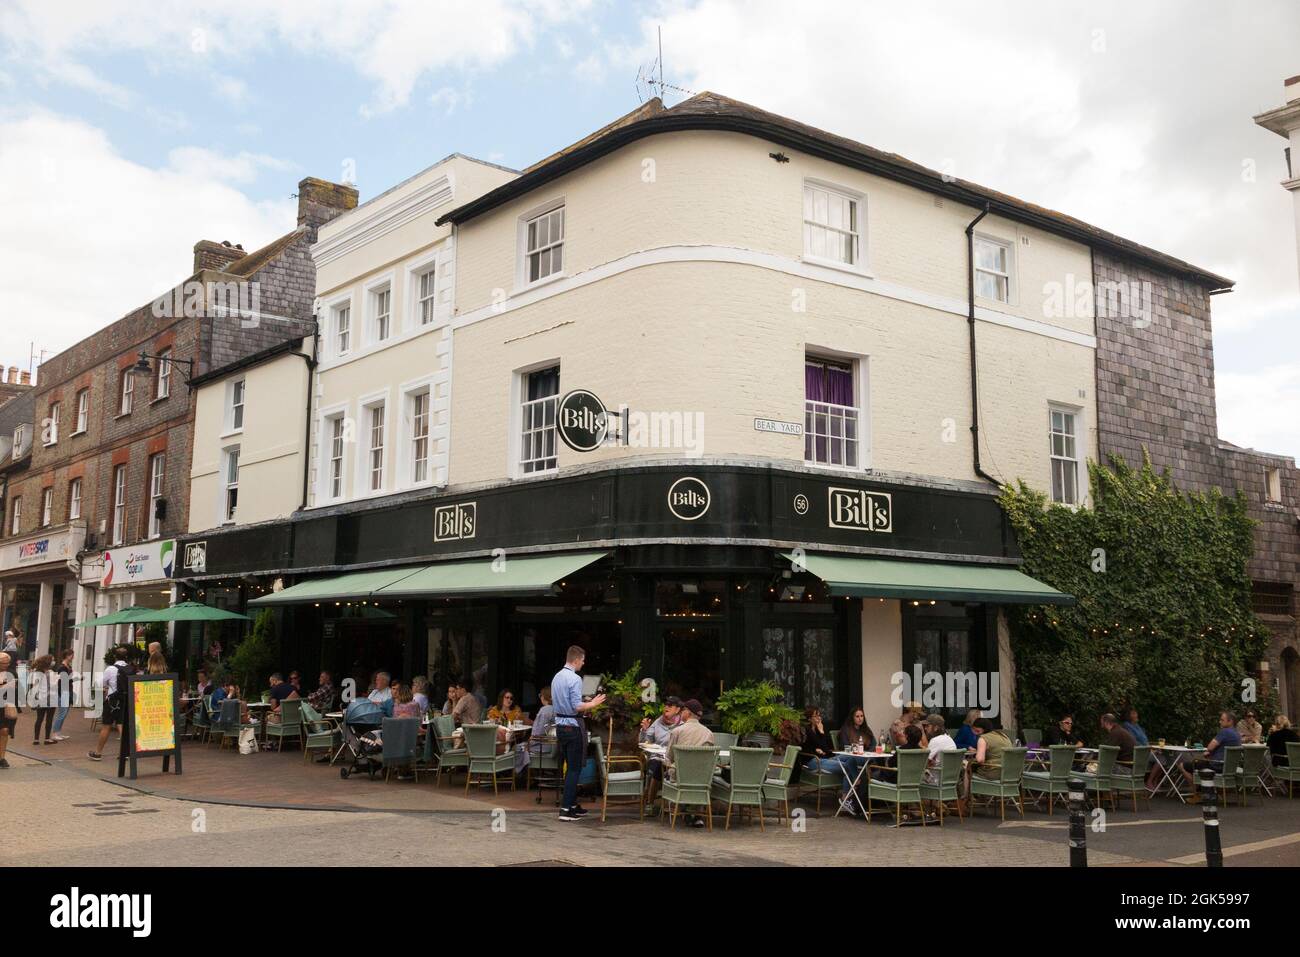 Bill's Restaurant, on the corner with Bear Yard, at 56 Cliffe High St, Lewes BN7 2AN. East Sussex. UK. The first ever Bill's was Lewes. (127) Stock Photo